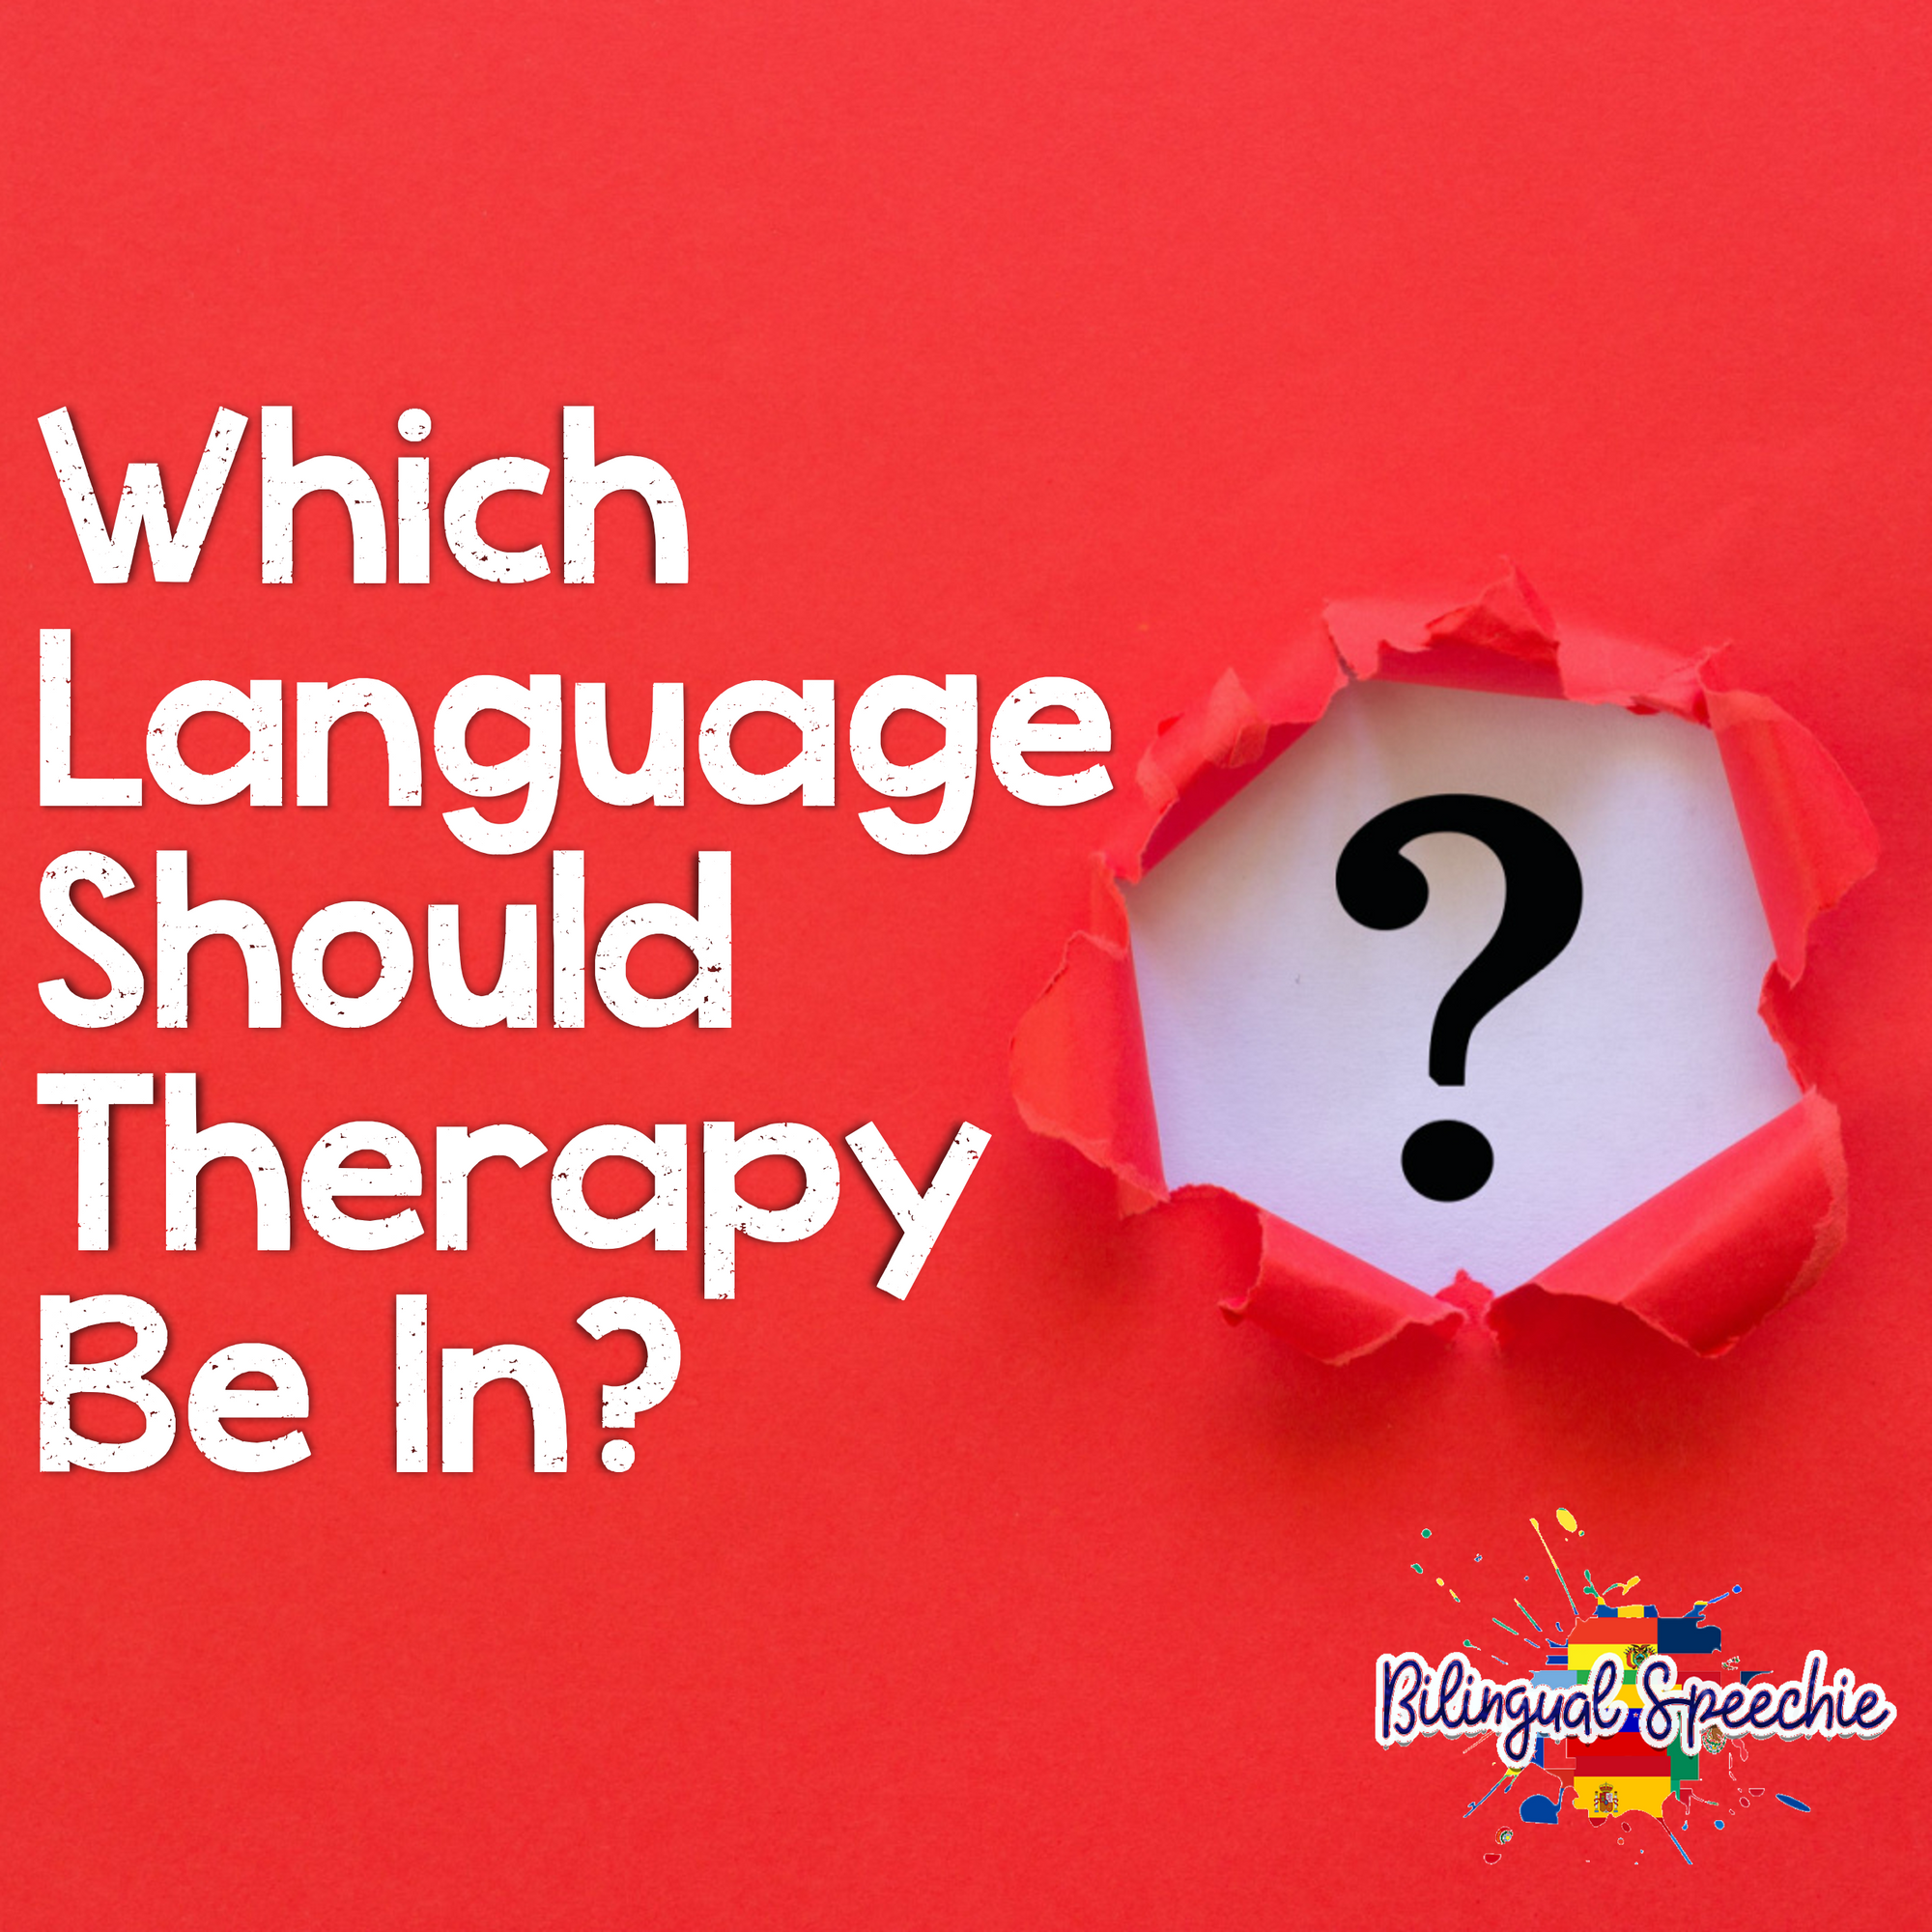 Language of Intervention: Which language should speech therapy be in?